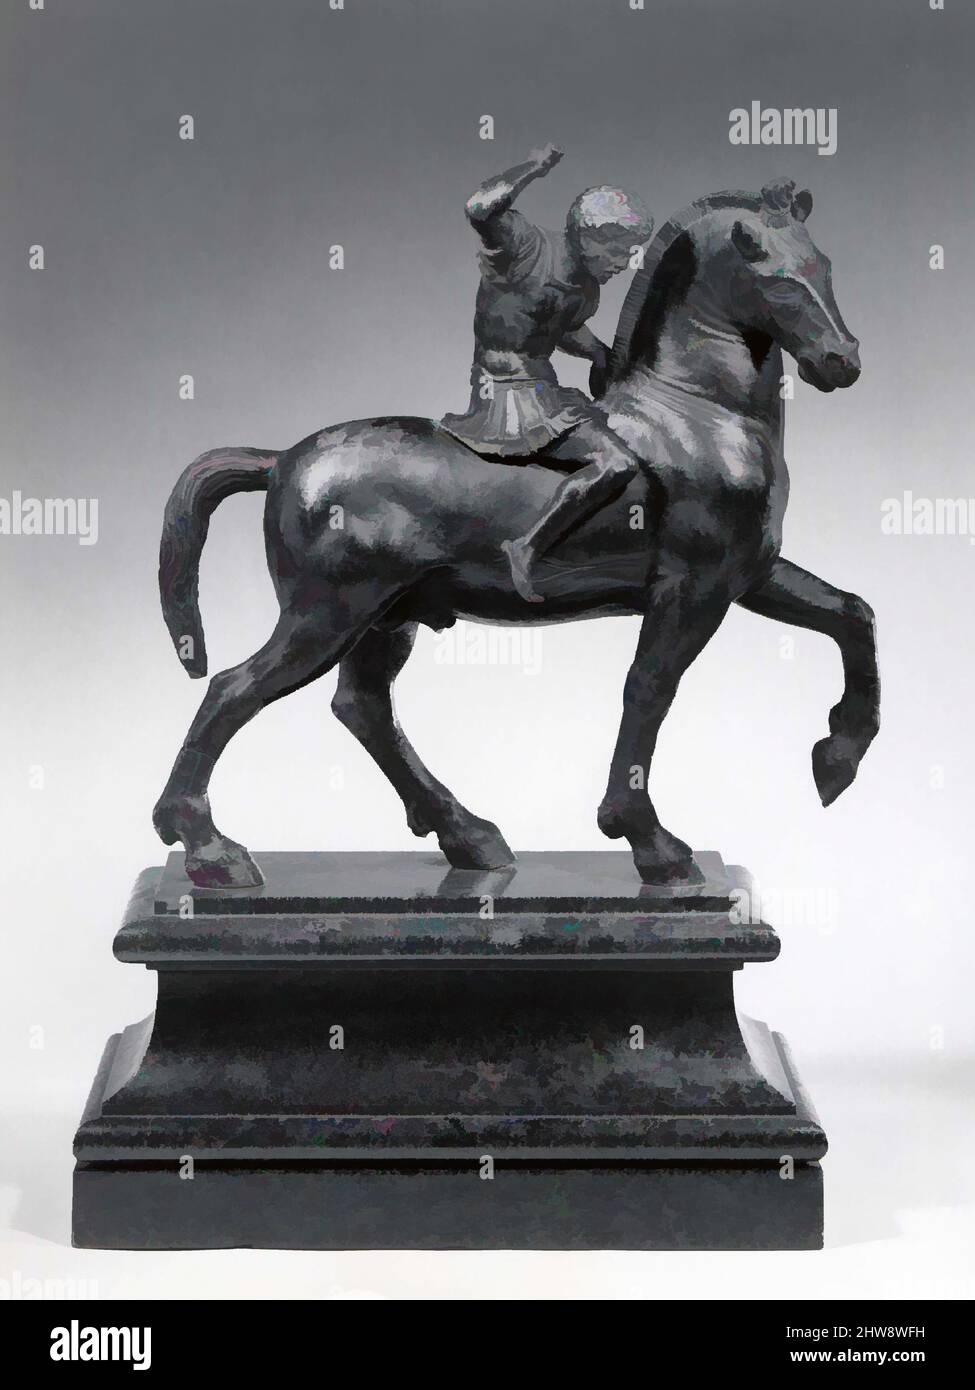 Art inspired by Warrior on Horseback, ca. 1540, Ternary alloy of copper, zinc and tin, with small traces of, H. 25.8 cm (excluding the modern, green marble base)., Metalwork-Bronze, Attributed to Desiderio da Firenze (Italian, born Florence, active Padua, 1532–45), During the, Classic works modernized by Artotop with a splash of modernity. Shapes, color and value, eye-catching visual impact on art. Emotions through freedom of artworks in a contemporary way. A timeless message pursuing a wildly creative new direction. Artists turning to the digital medium and creating the Artotop NFT Stock Photo